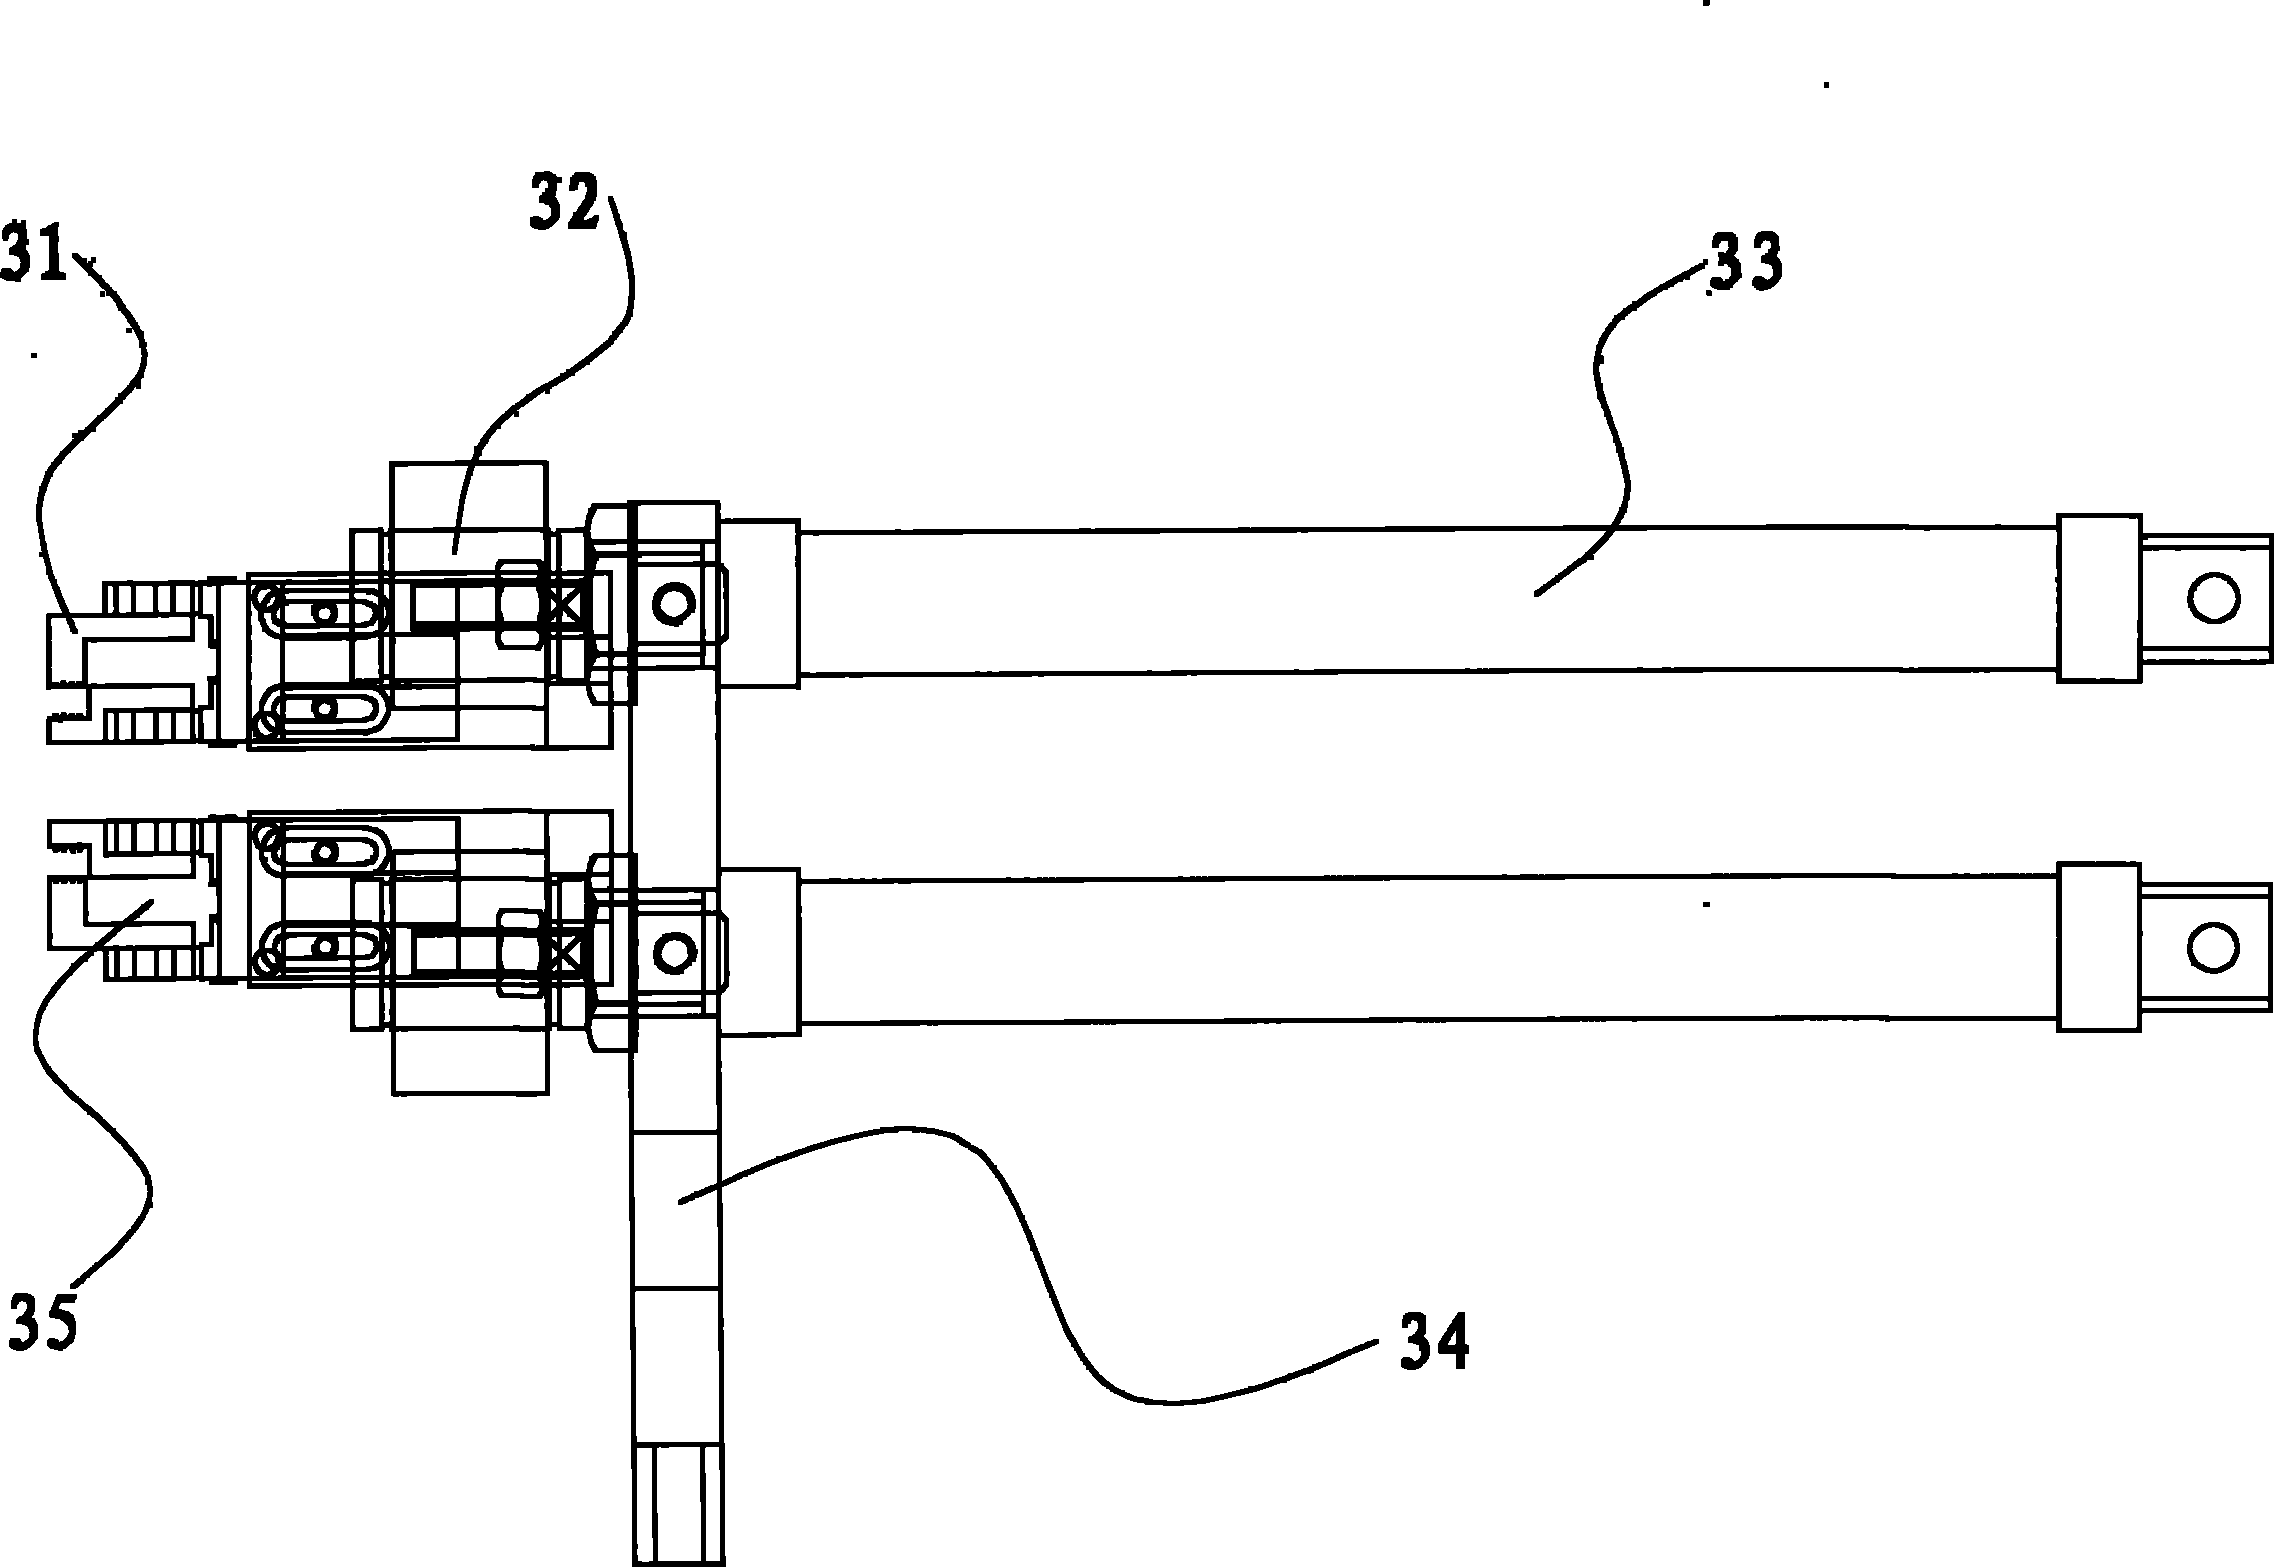 Automatic adhesive feeding device for tabs